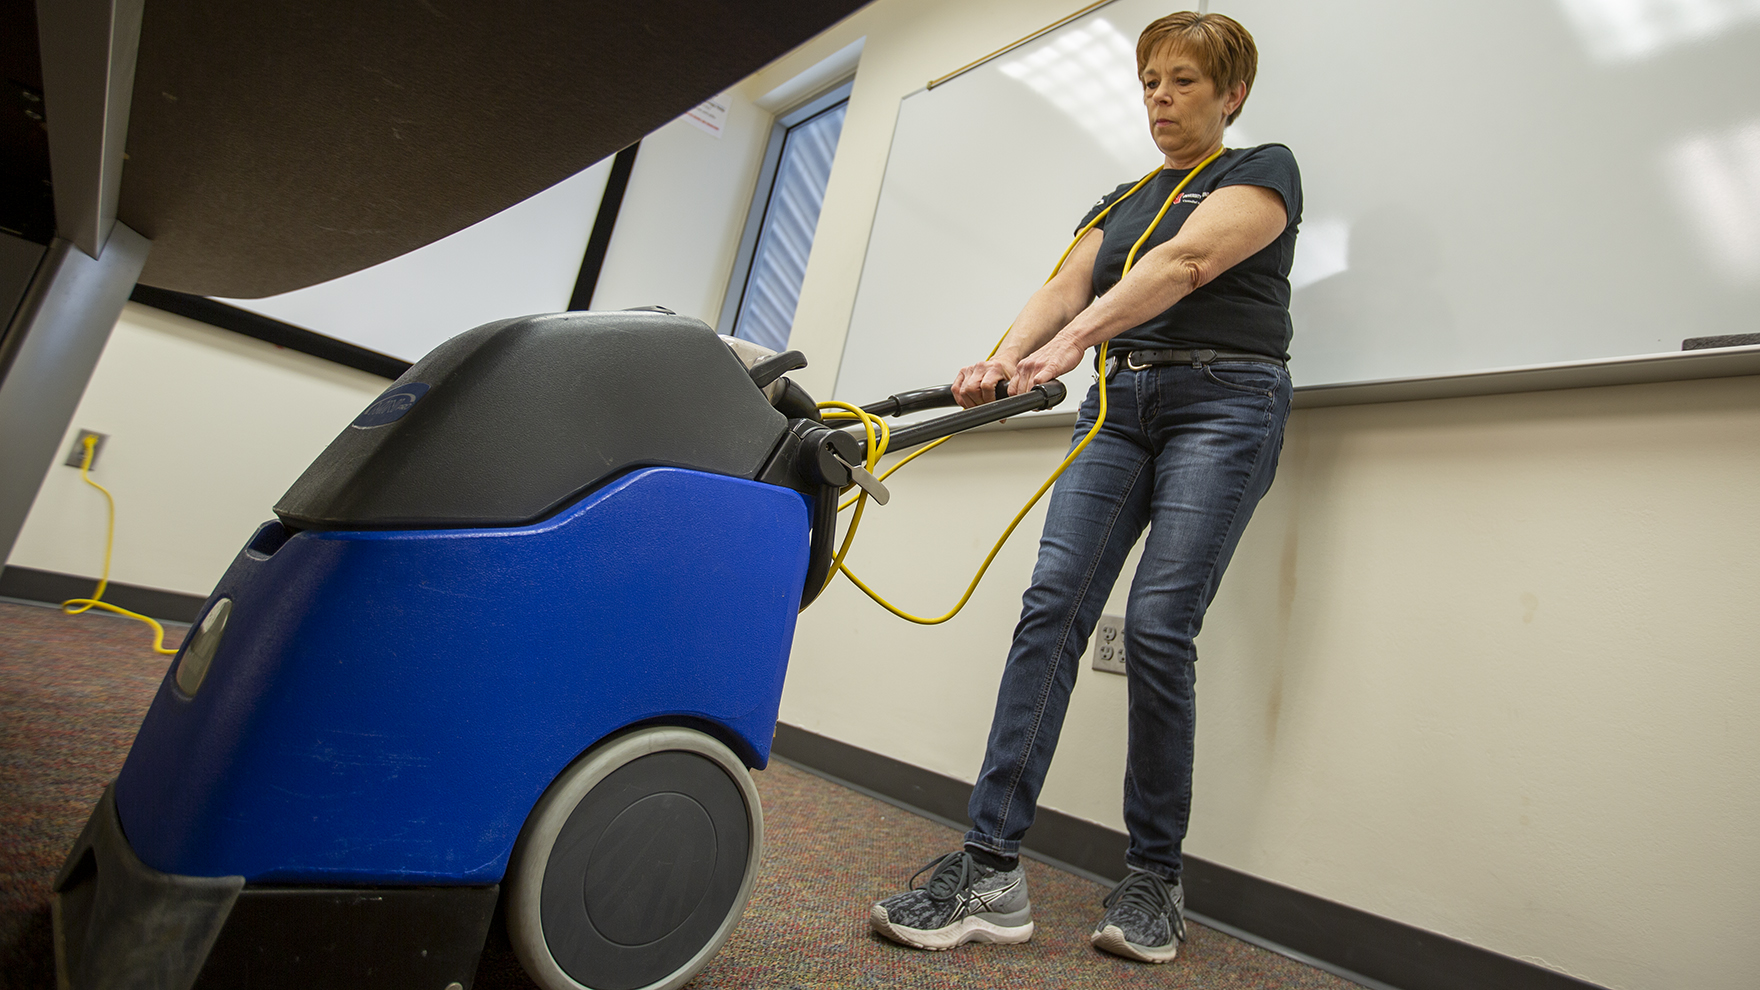 Nebraska's Tracy Oehlerking cleans the carpet below a desk in a Schorr Center meeting room on March 25, 2022. After careers in cosmetology and real estate, Oehlerking found her passion helping keep campus spaces clean for students, faculty and staff.